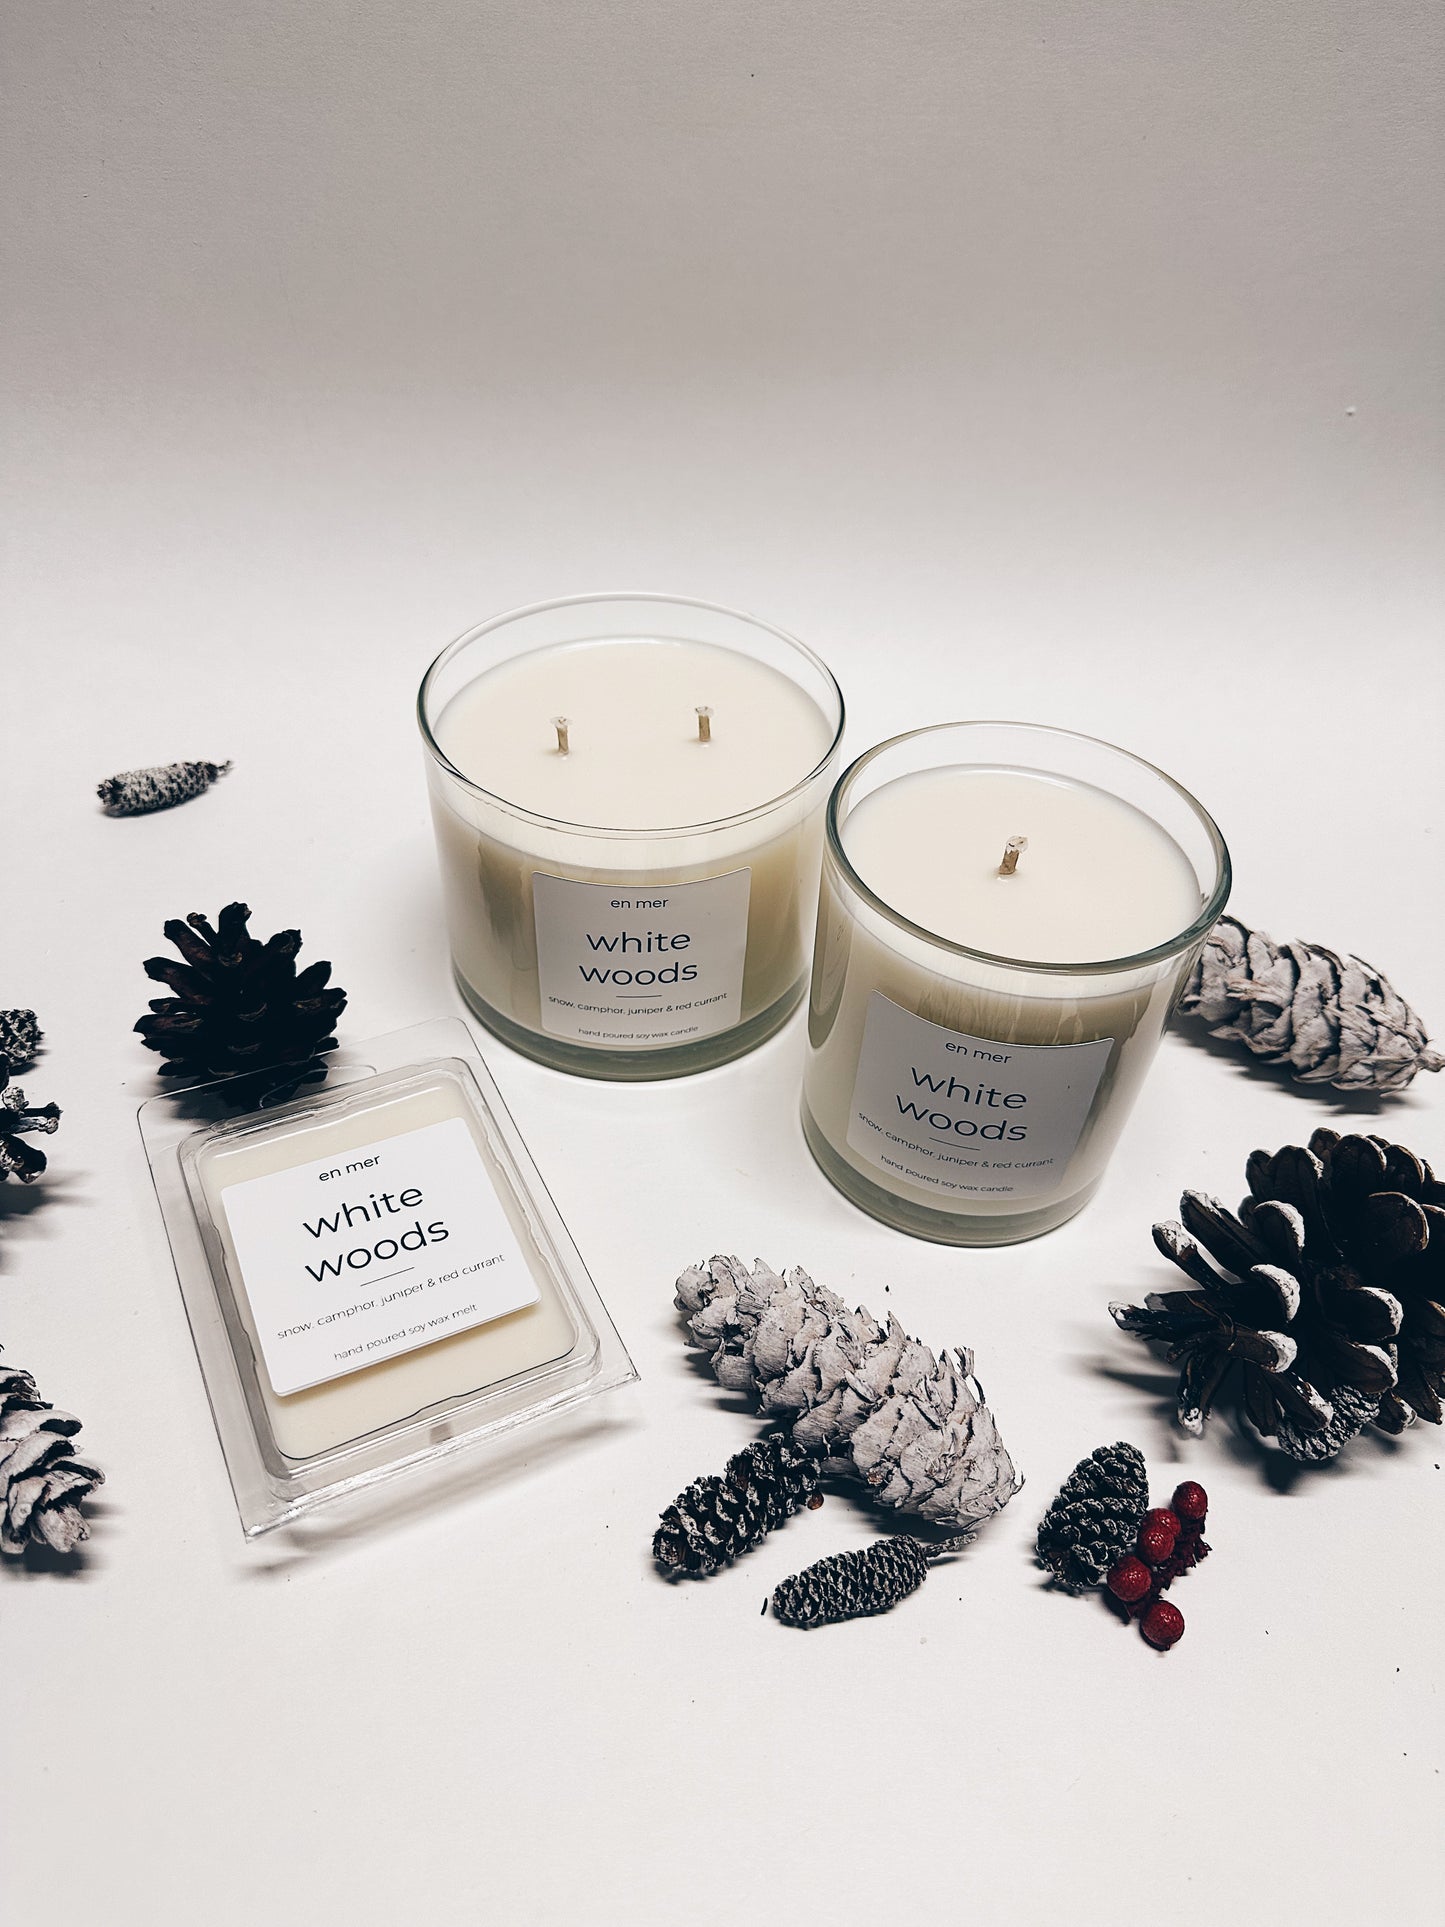 en mer | white woods | soy wax candle